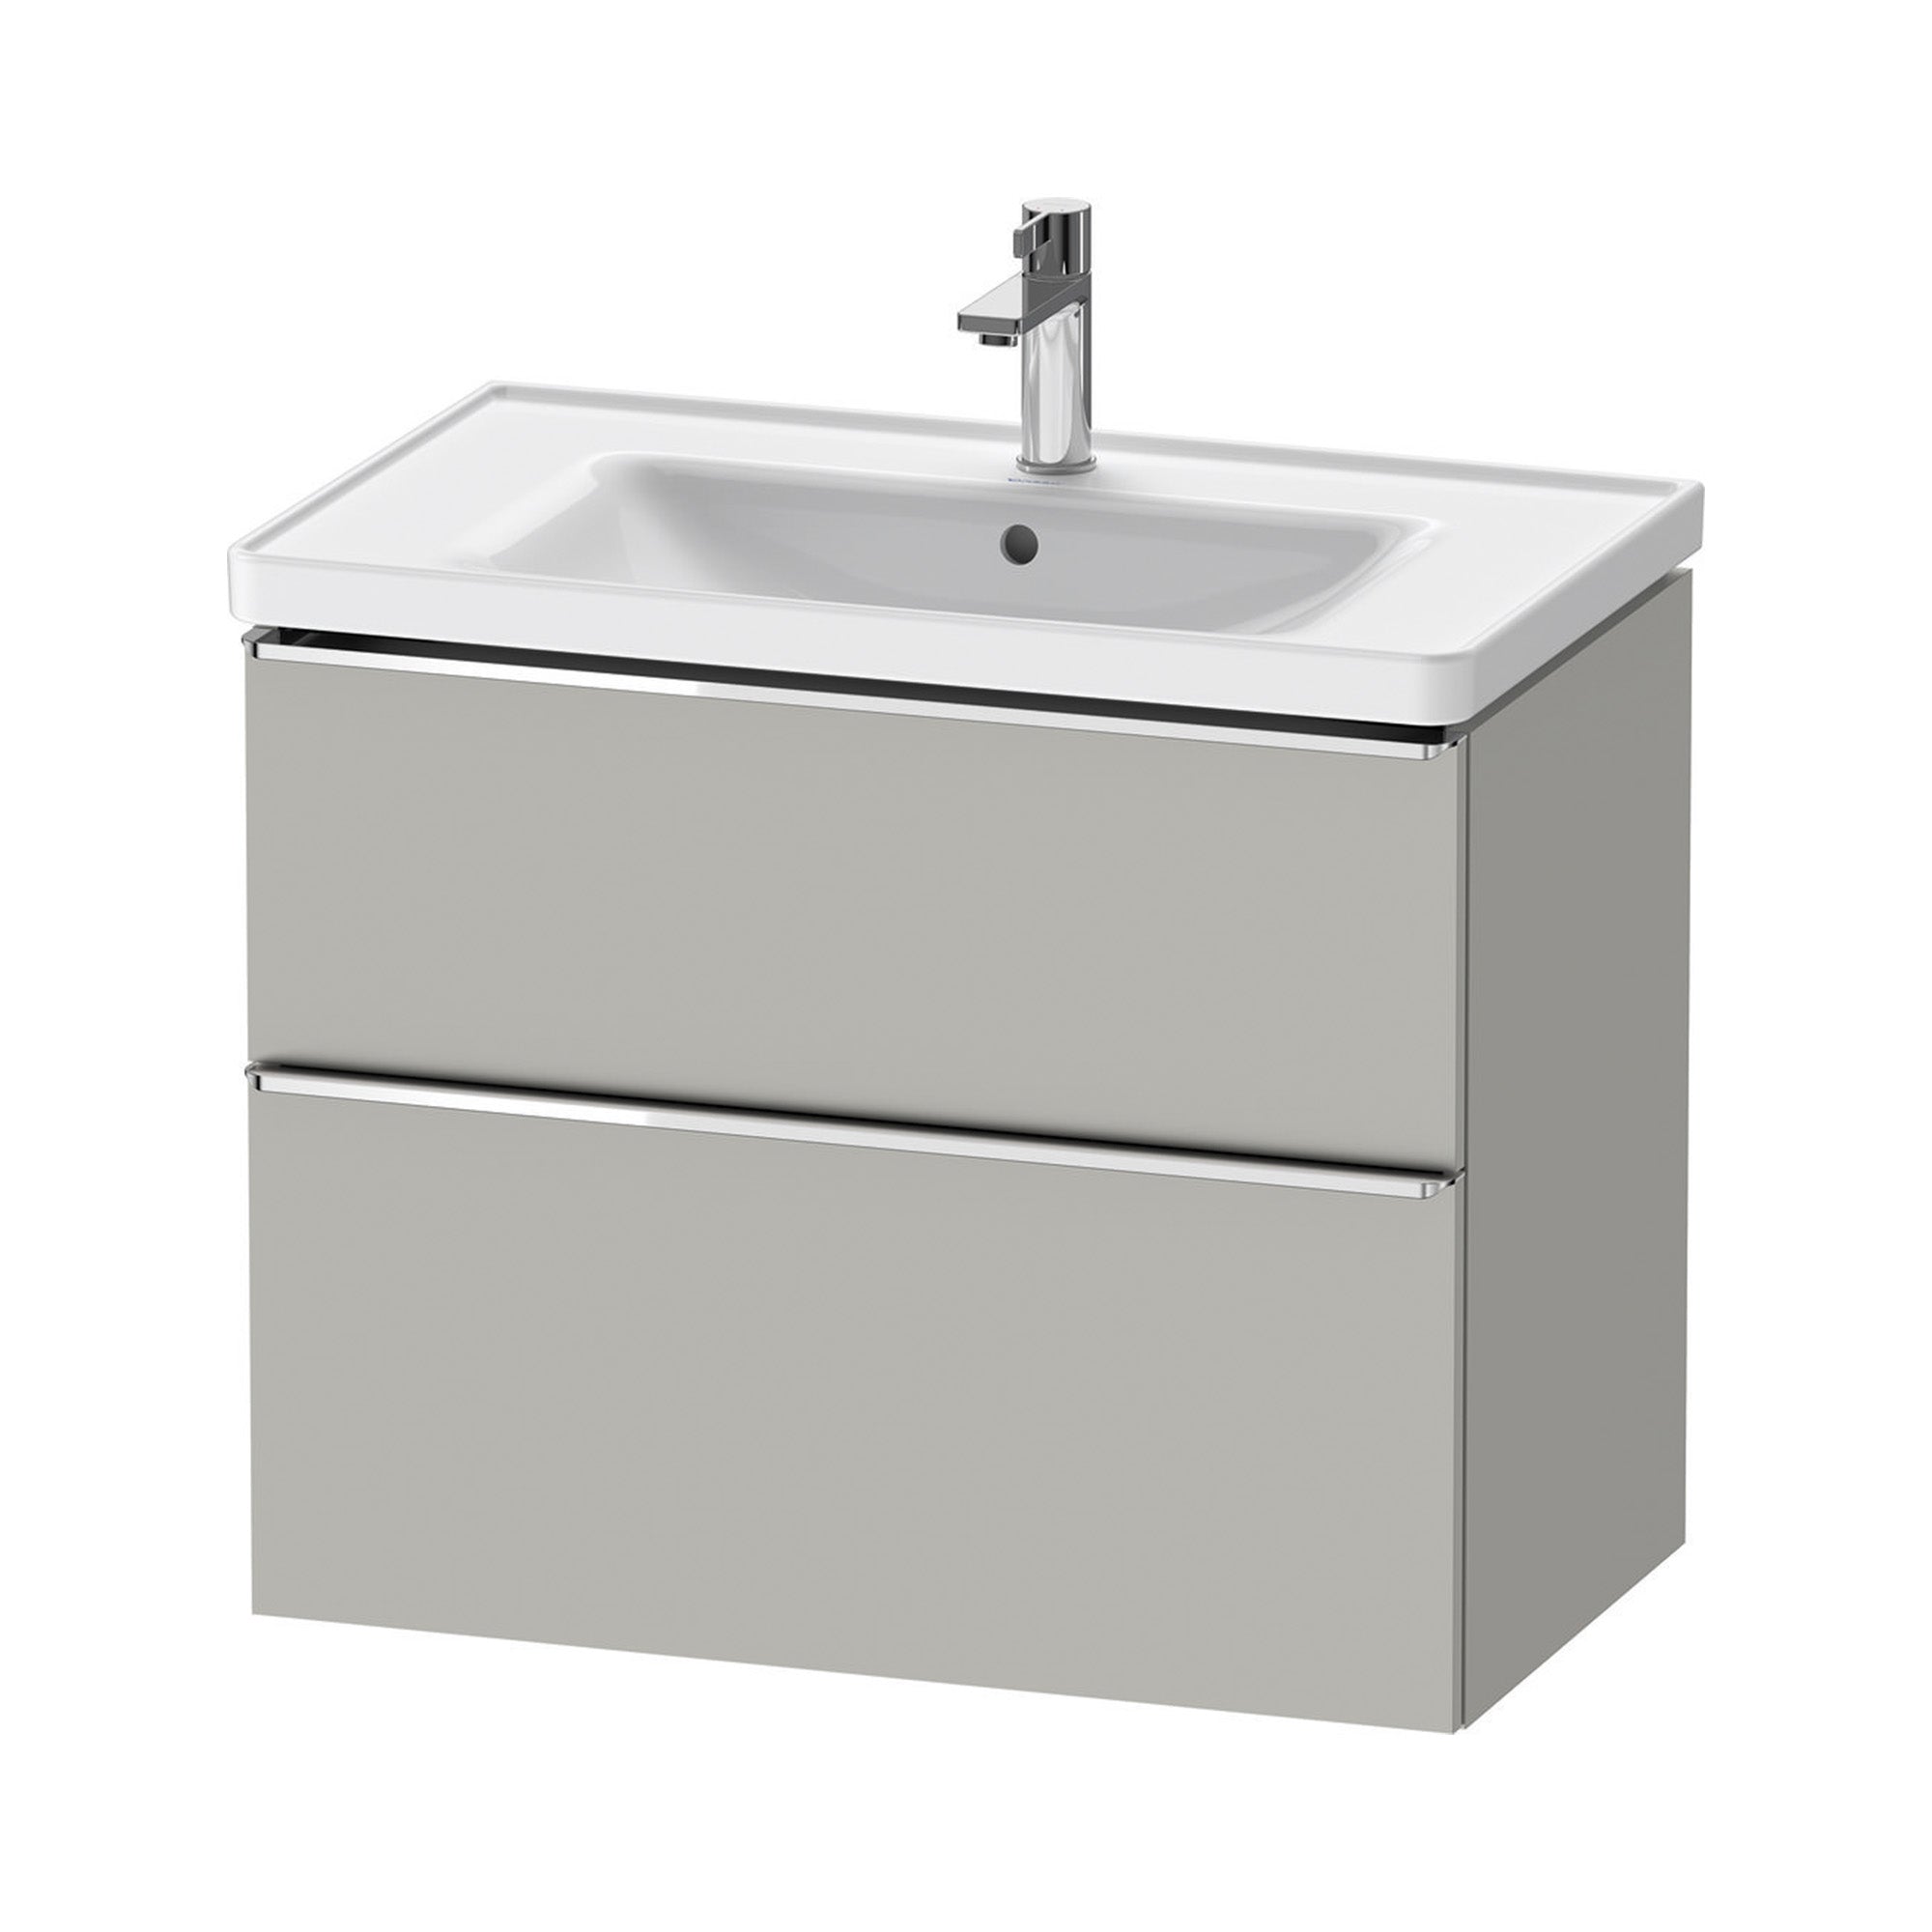 duravit d-neo 800mm wall mounted vanity unit with d-neo basin concrete grey chrome handles